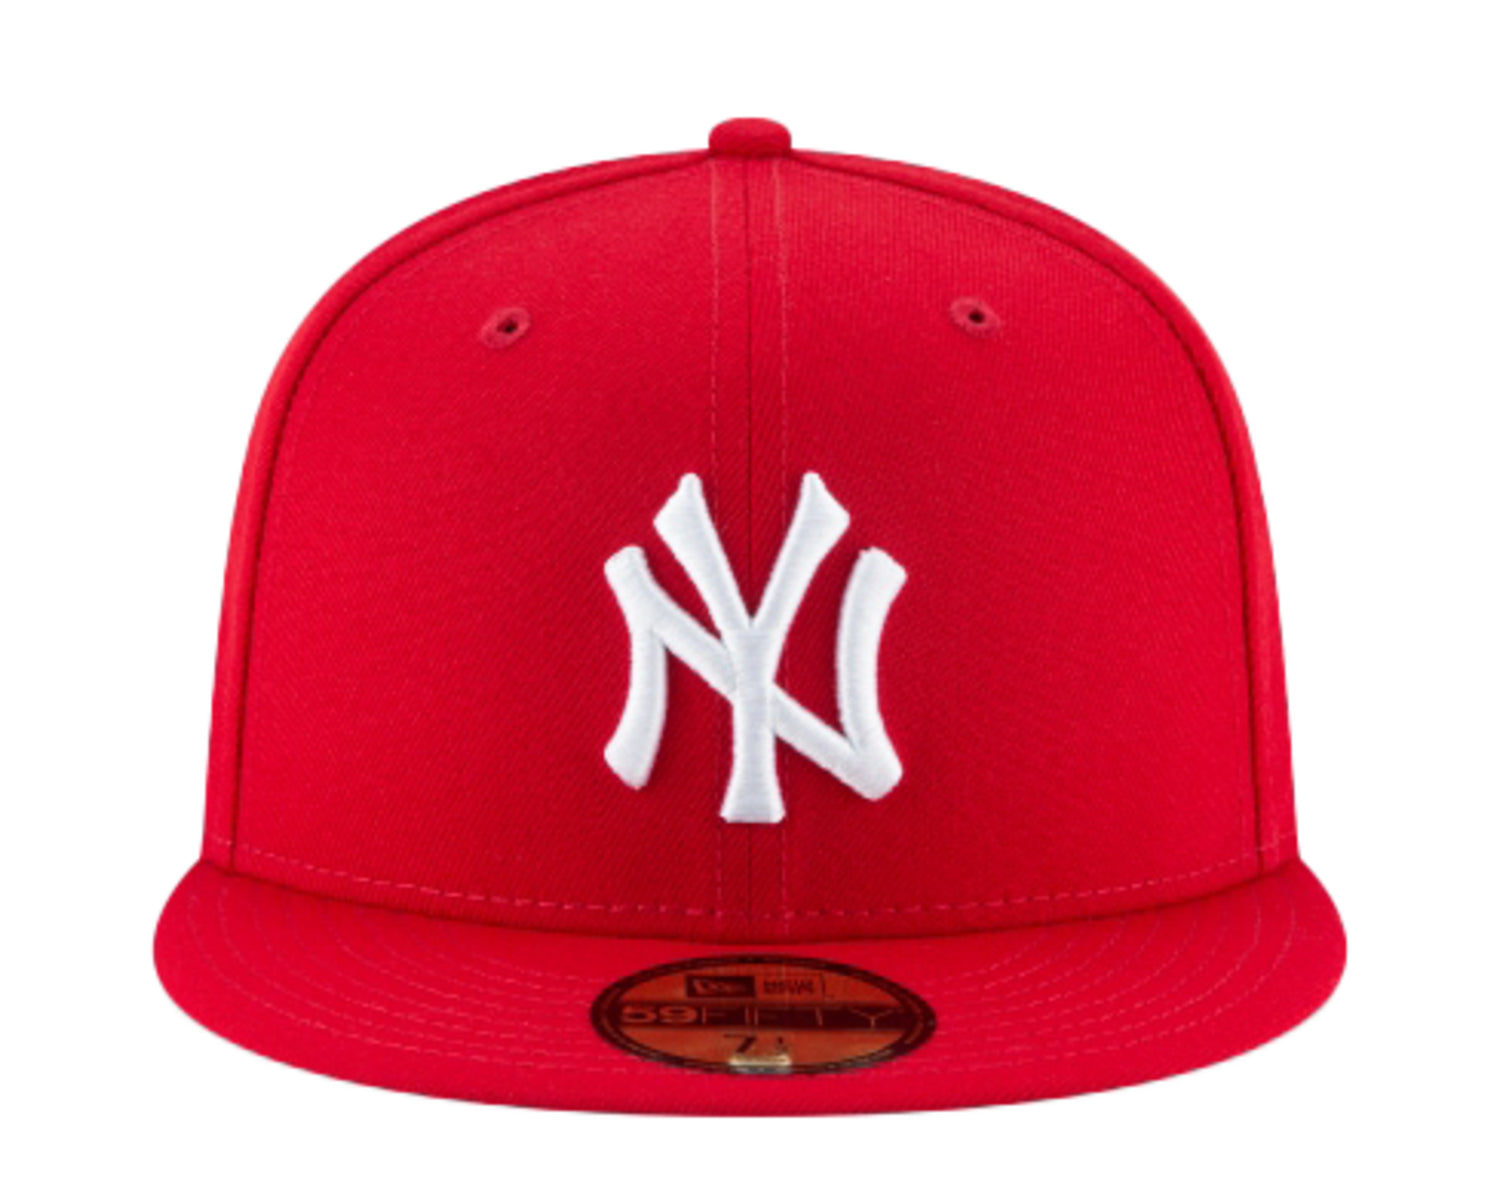 New Era 59Fifty MLB New York Yankees Basic Fitted Hat